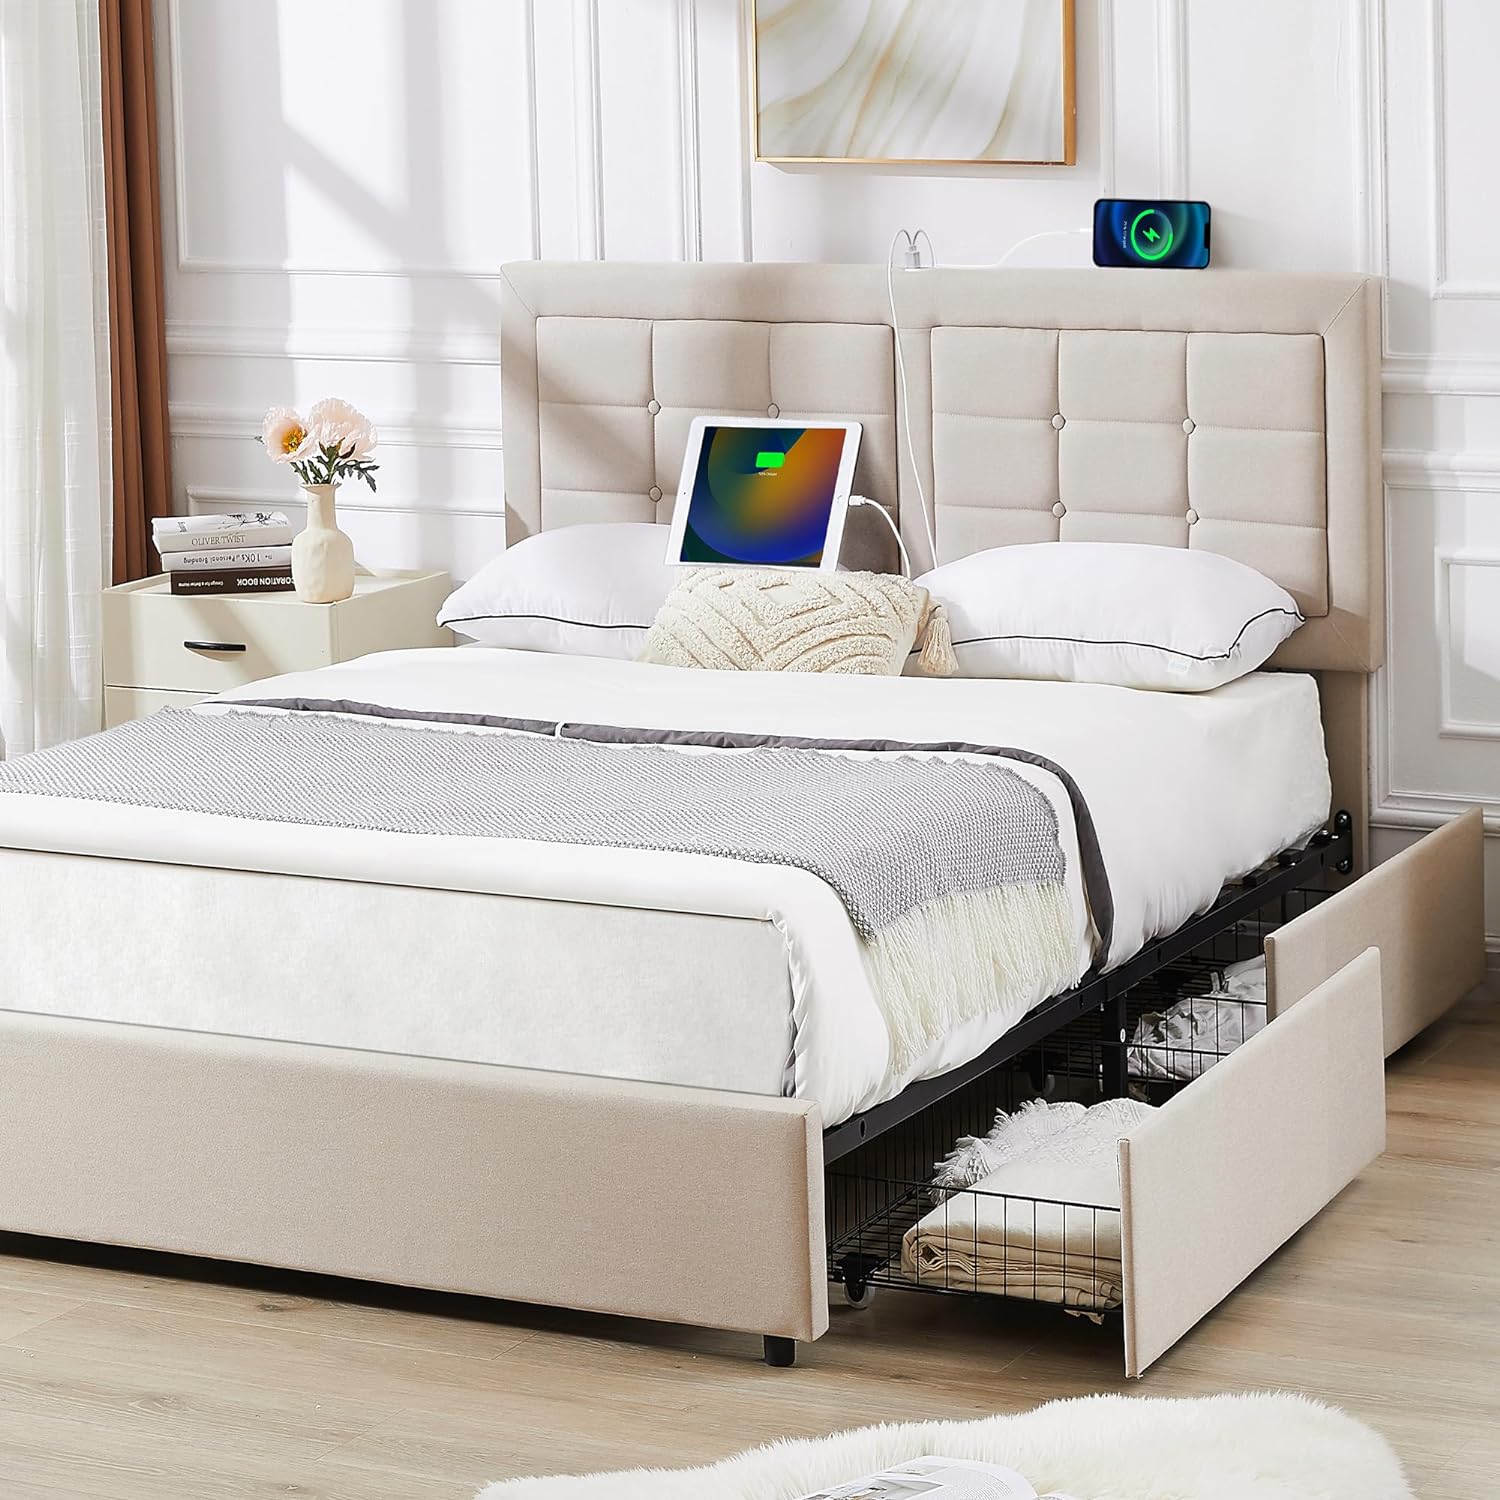 VECELO Bed Frame with 4 Drawers, Adjustable Tufted Button Headboard